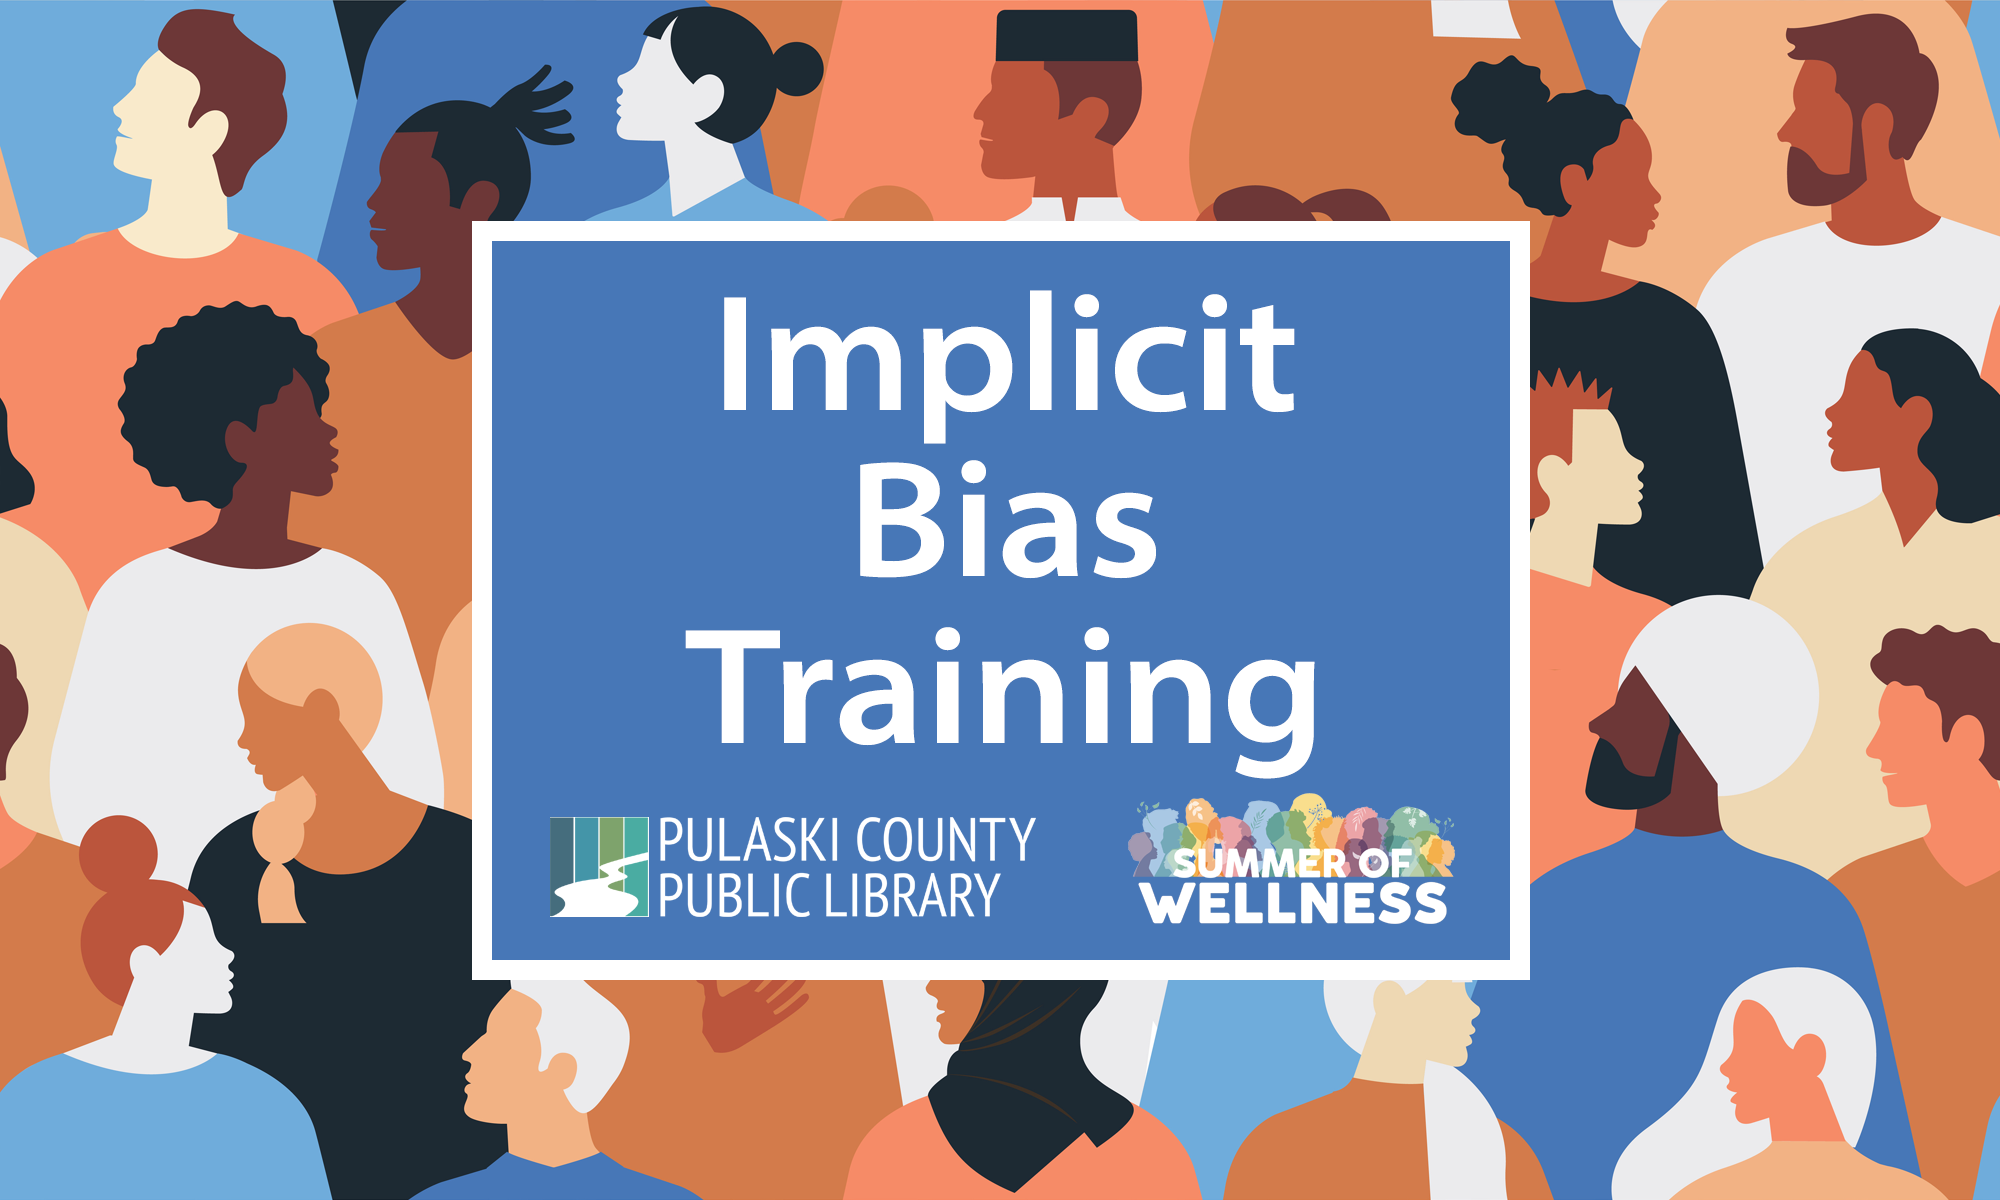 Illustration of a diverse crowd of people with the text "Implicit Bias Training."